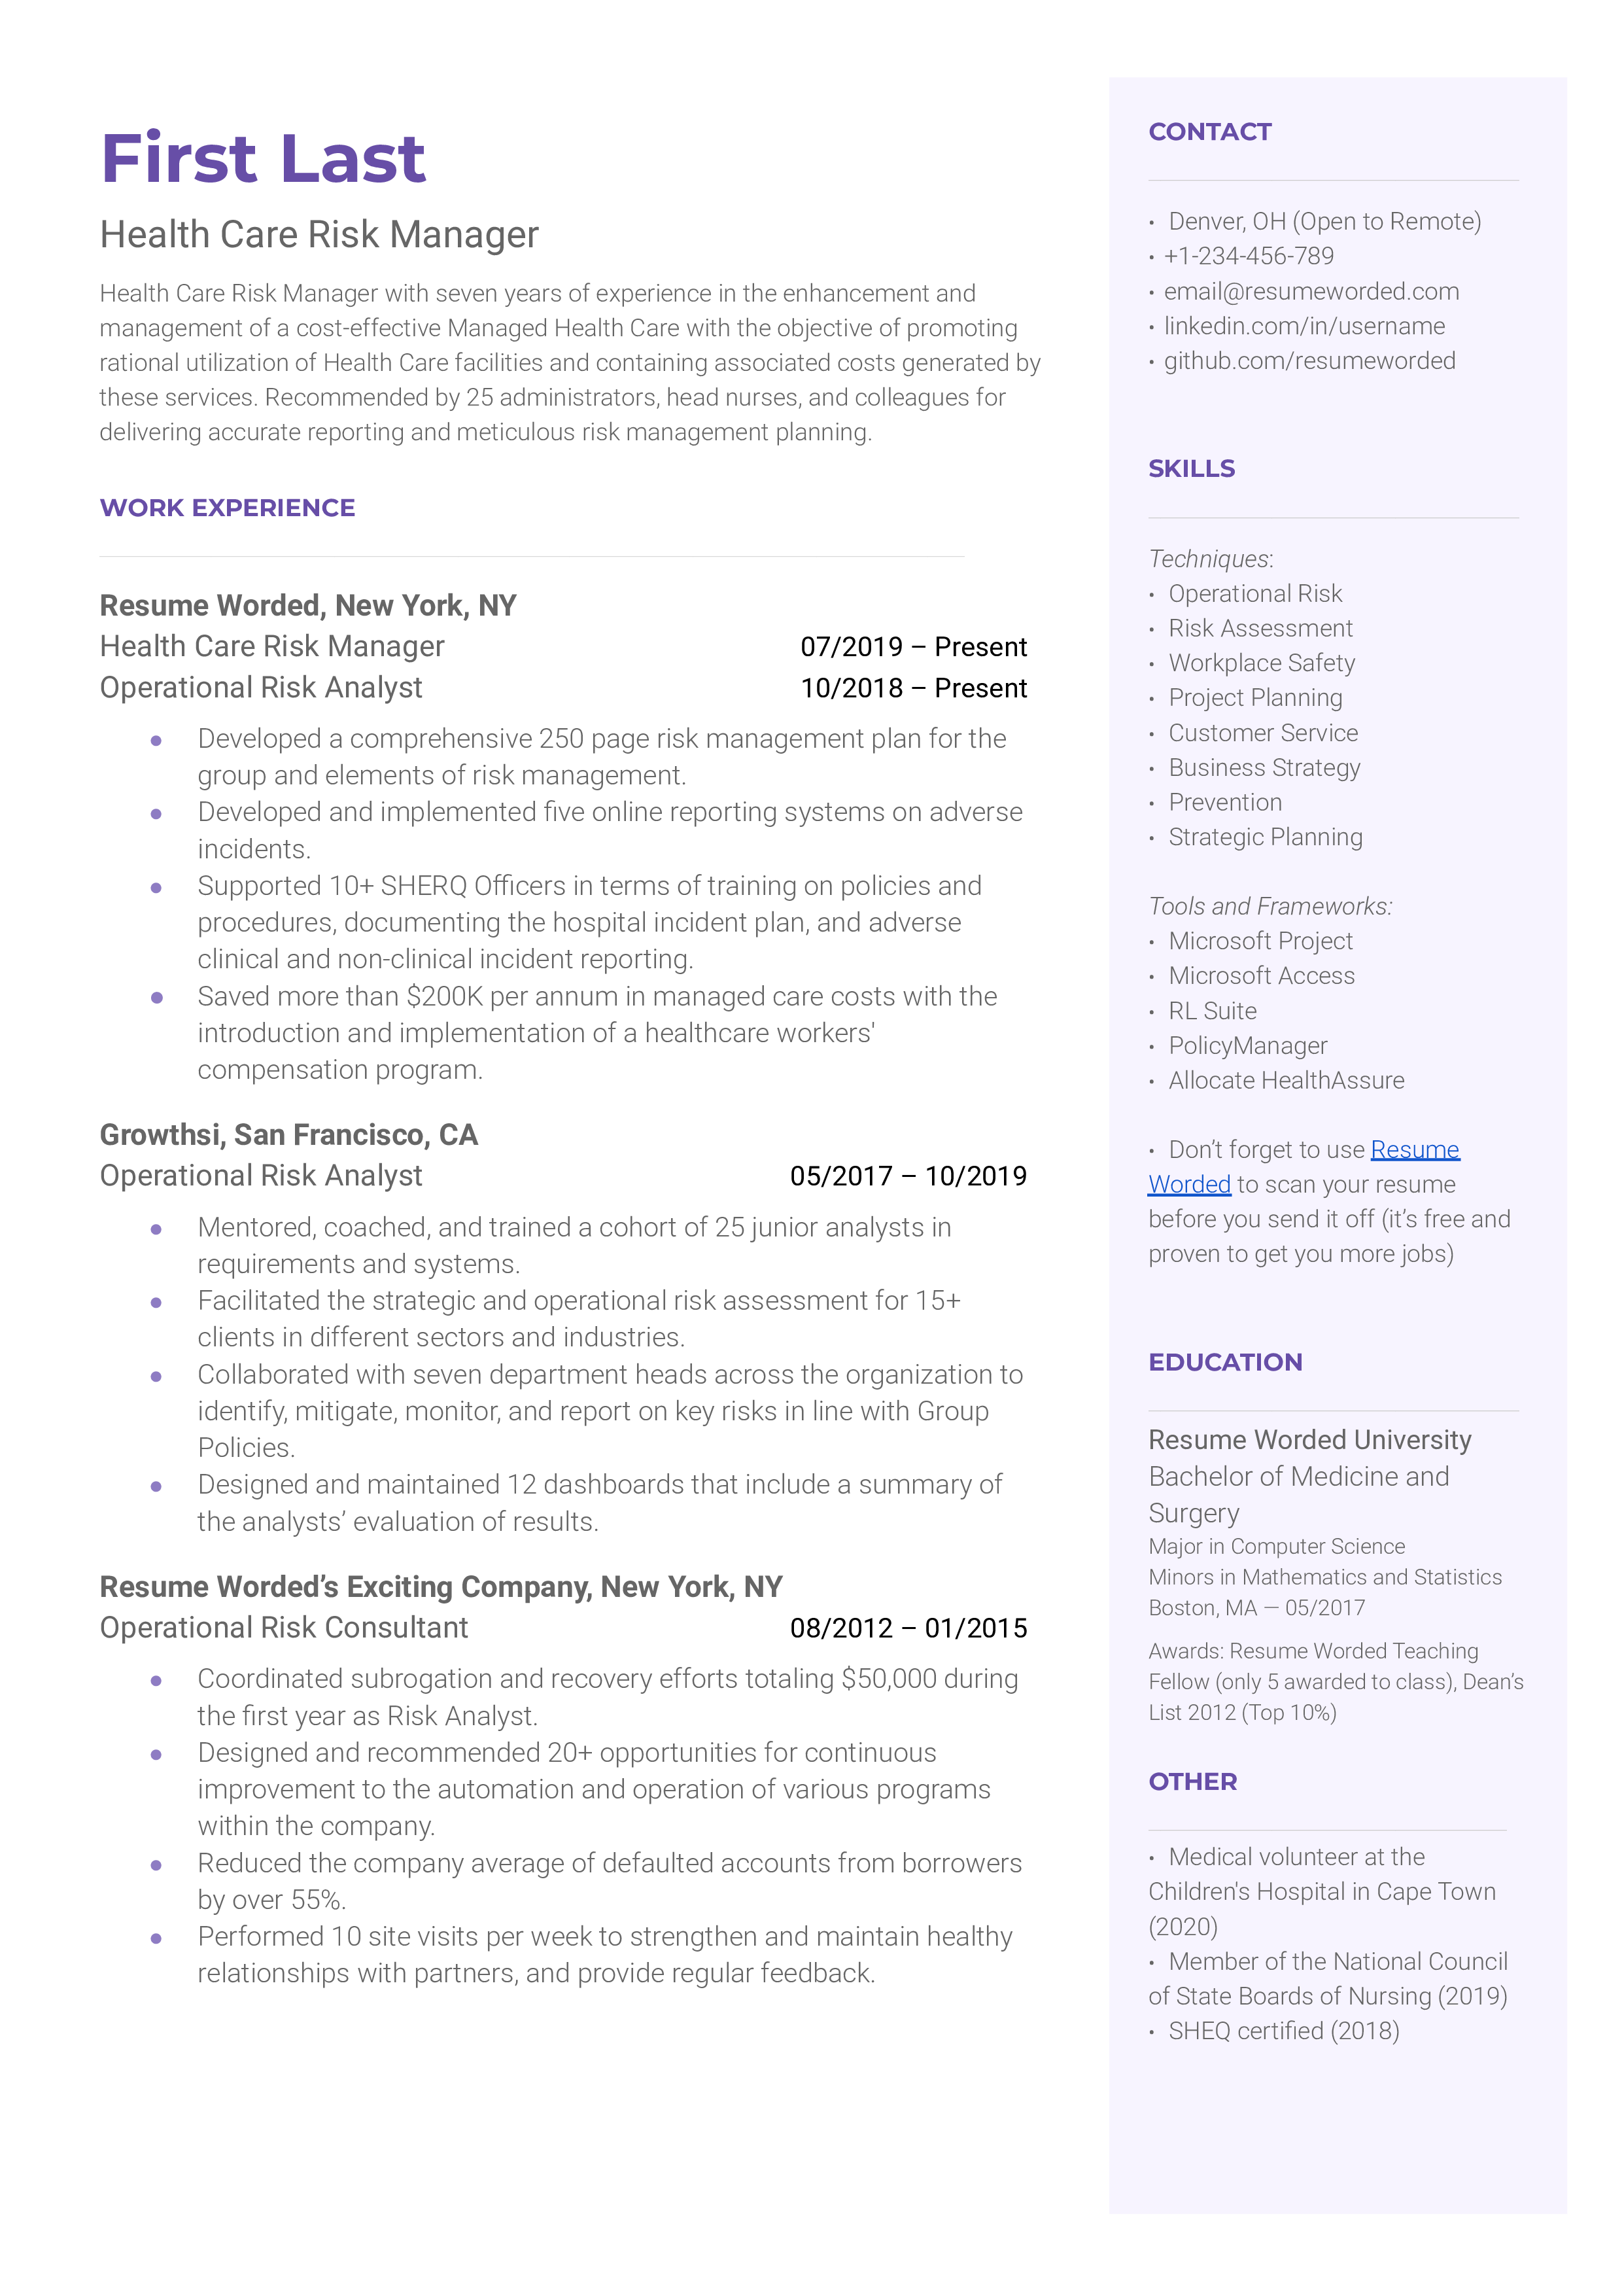 Health Care Risk Manager Resume Template + Example